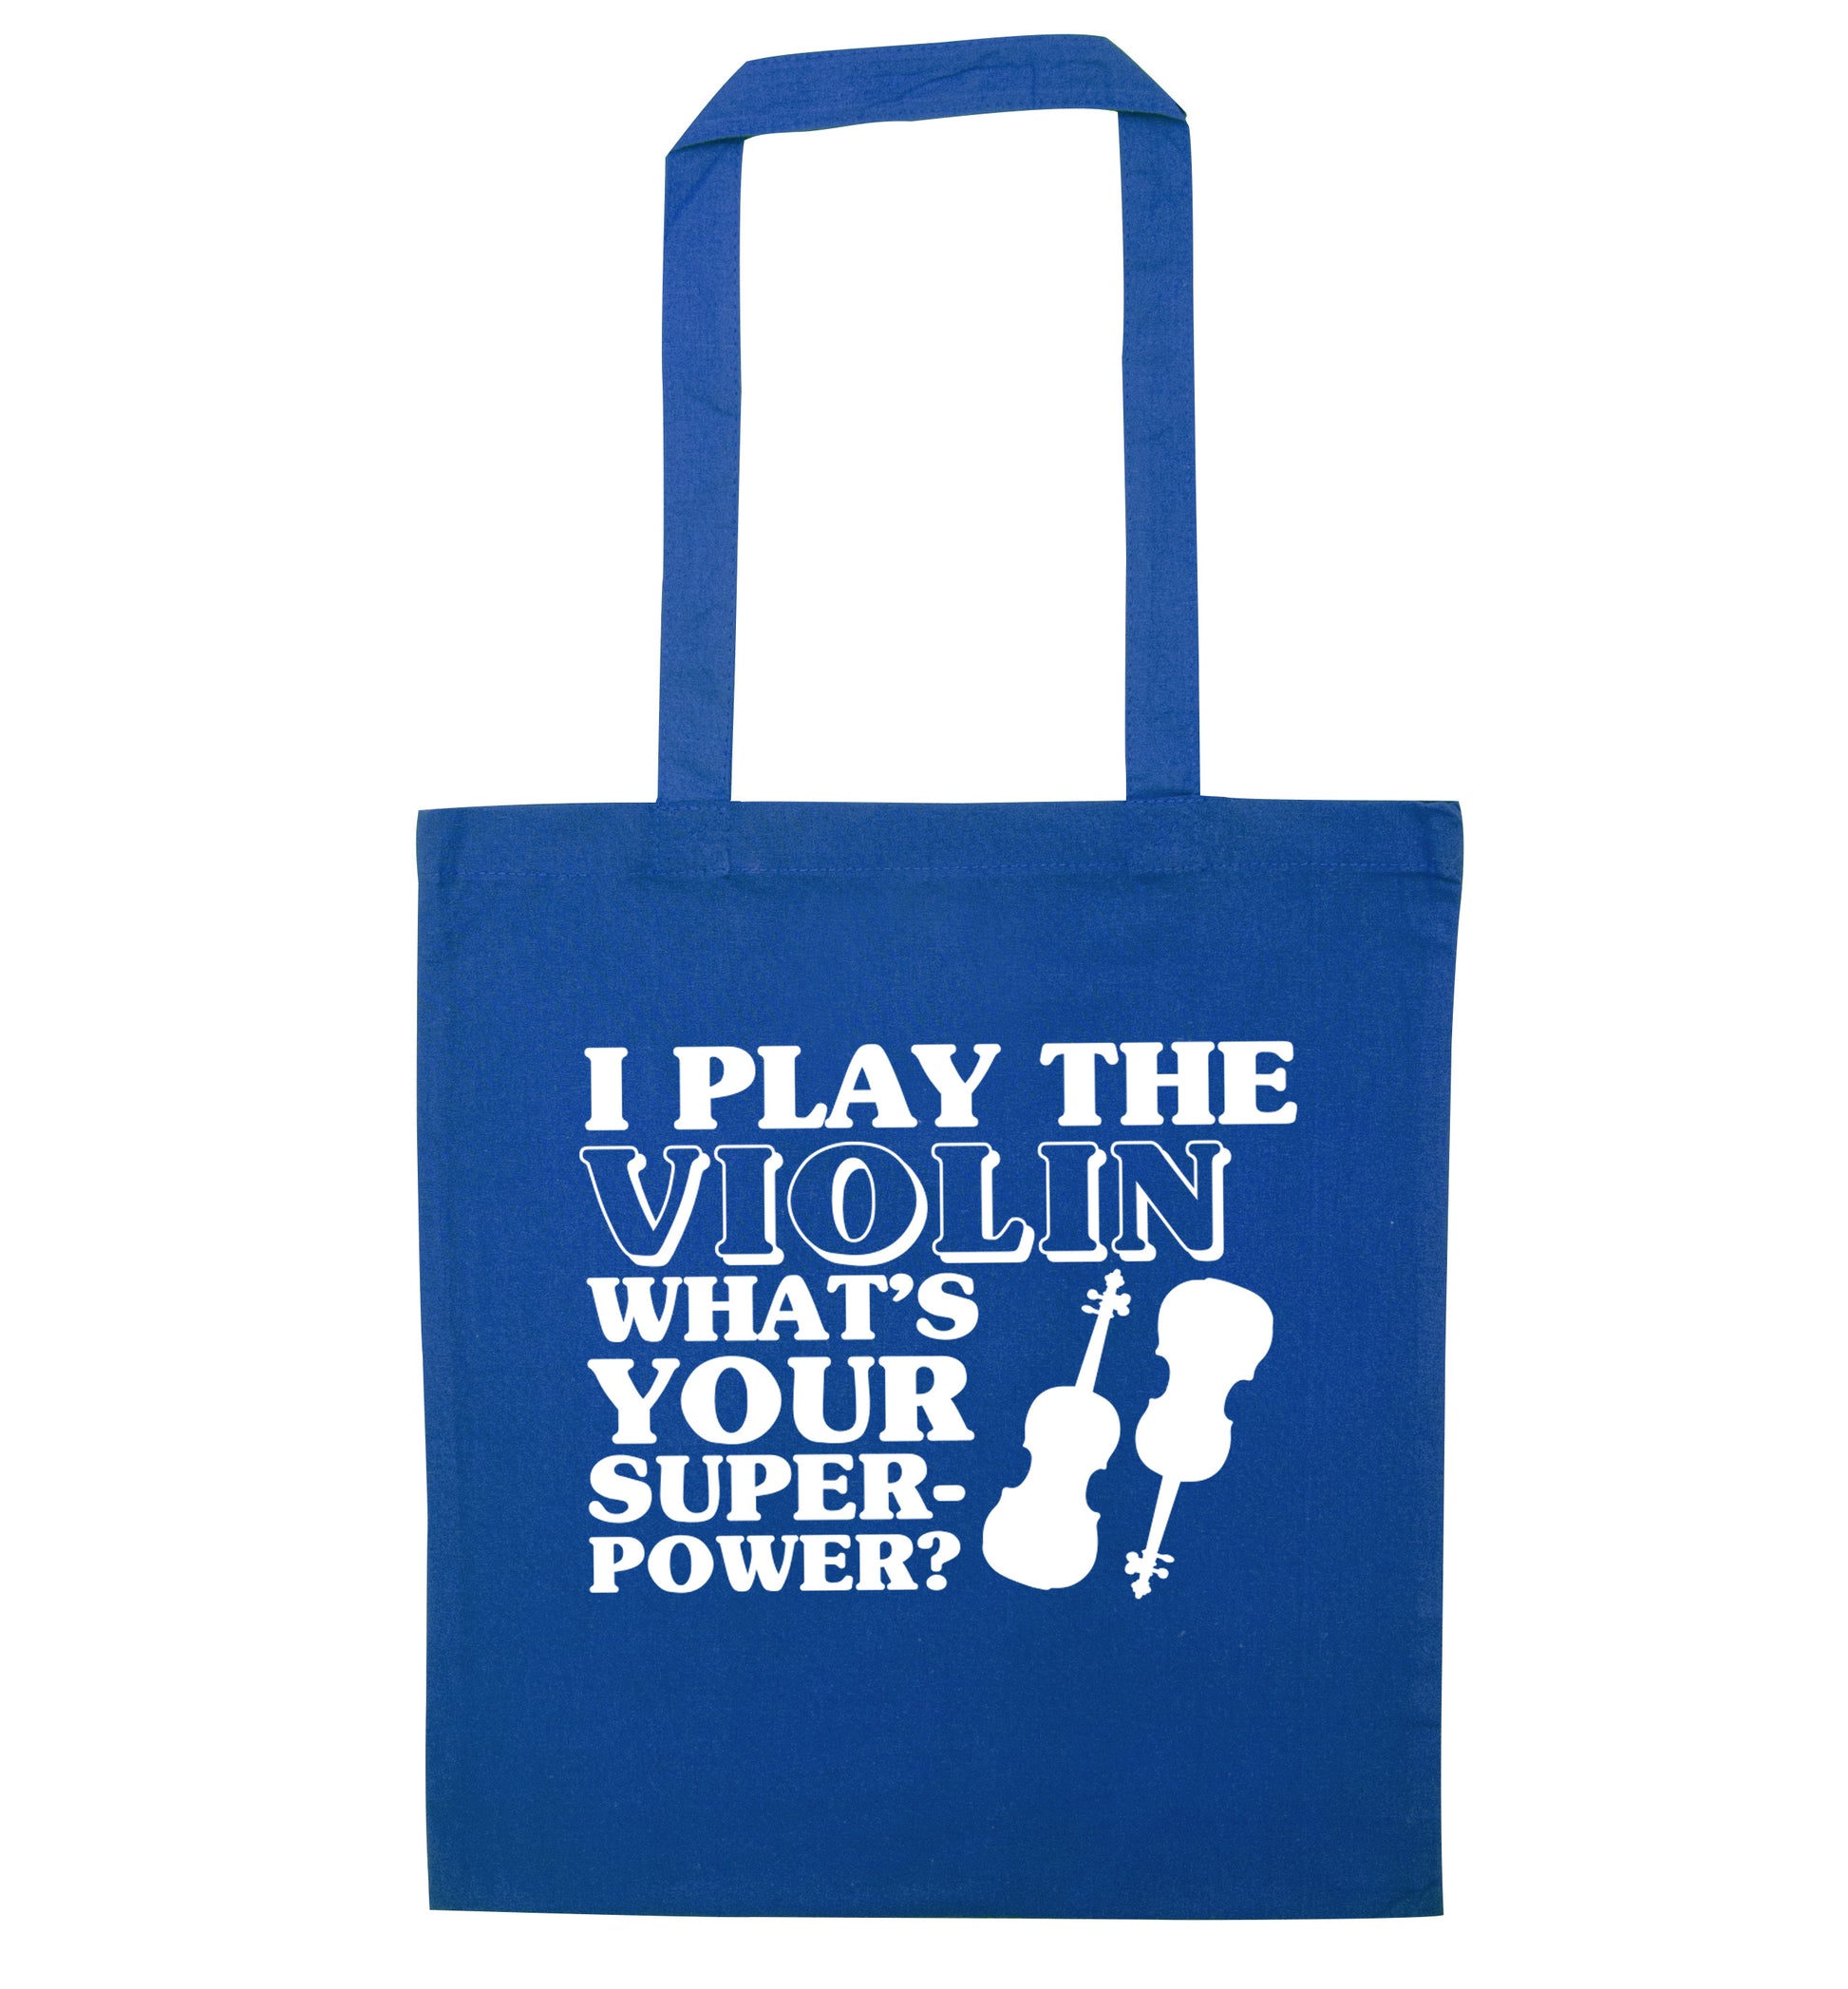 I Play Violin What's Your Superpower? blue tote bag